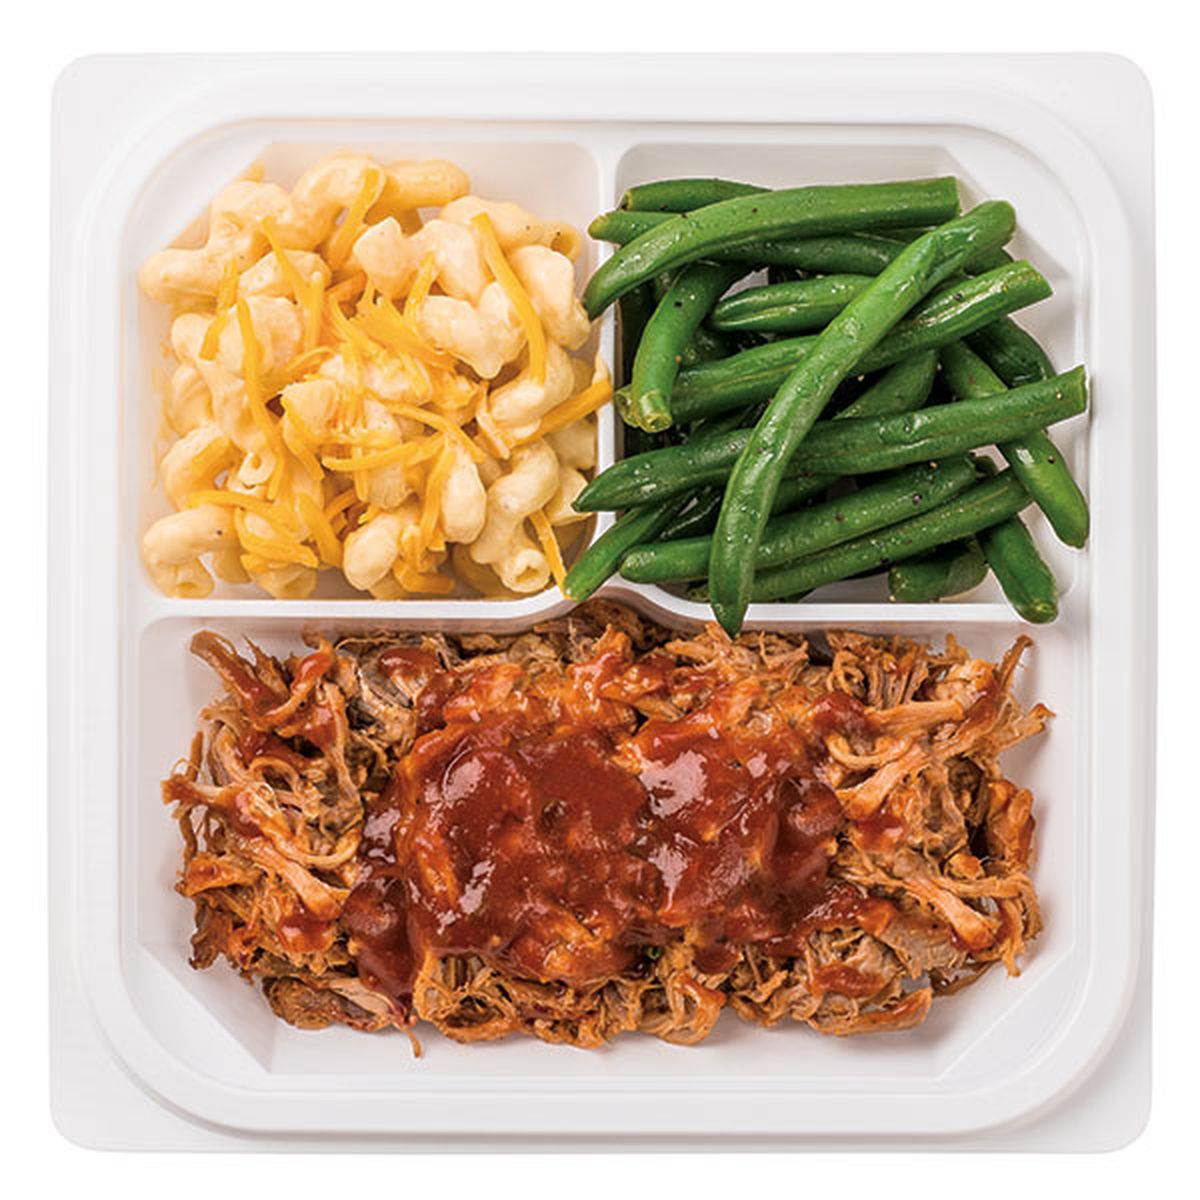 Calories in Wegmans Pulled Pork with BBQ Sauce, Seasoned Green Beans and Macaroni & Cheese